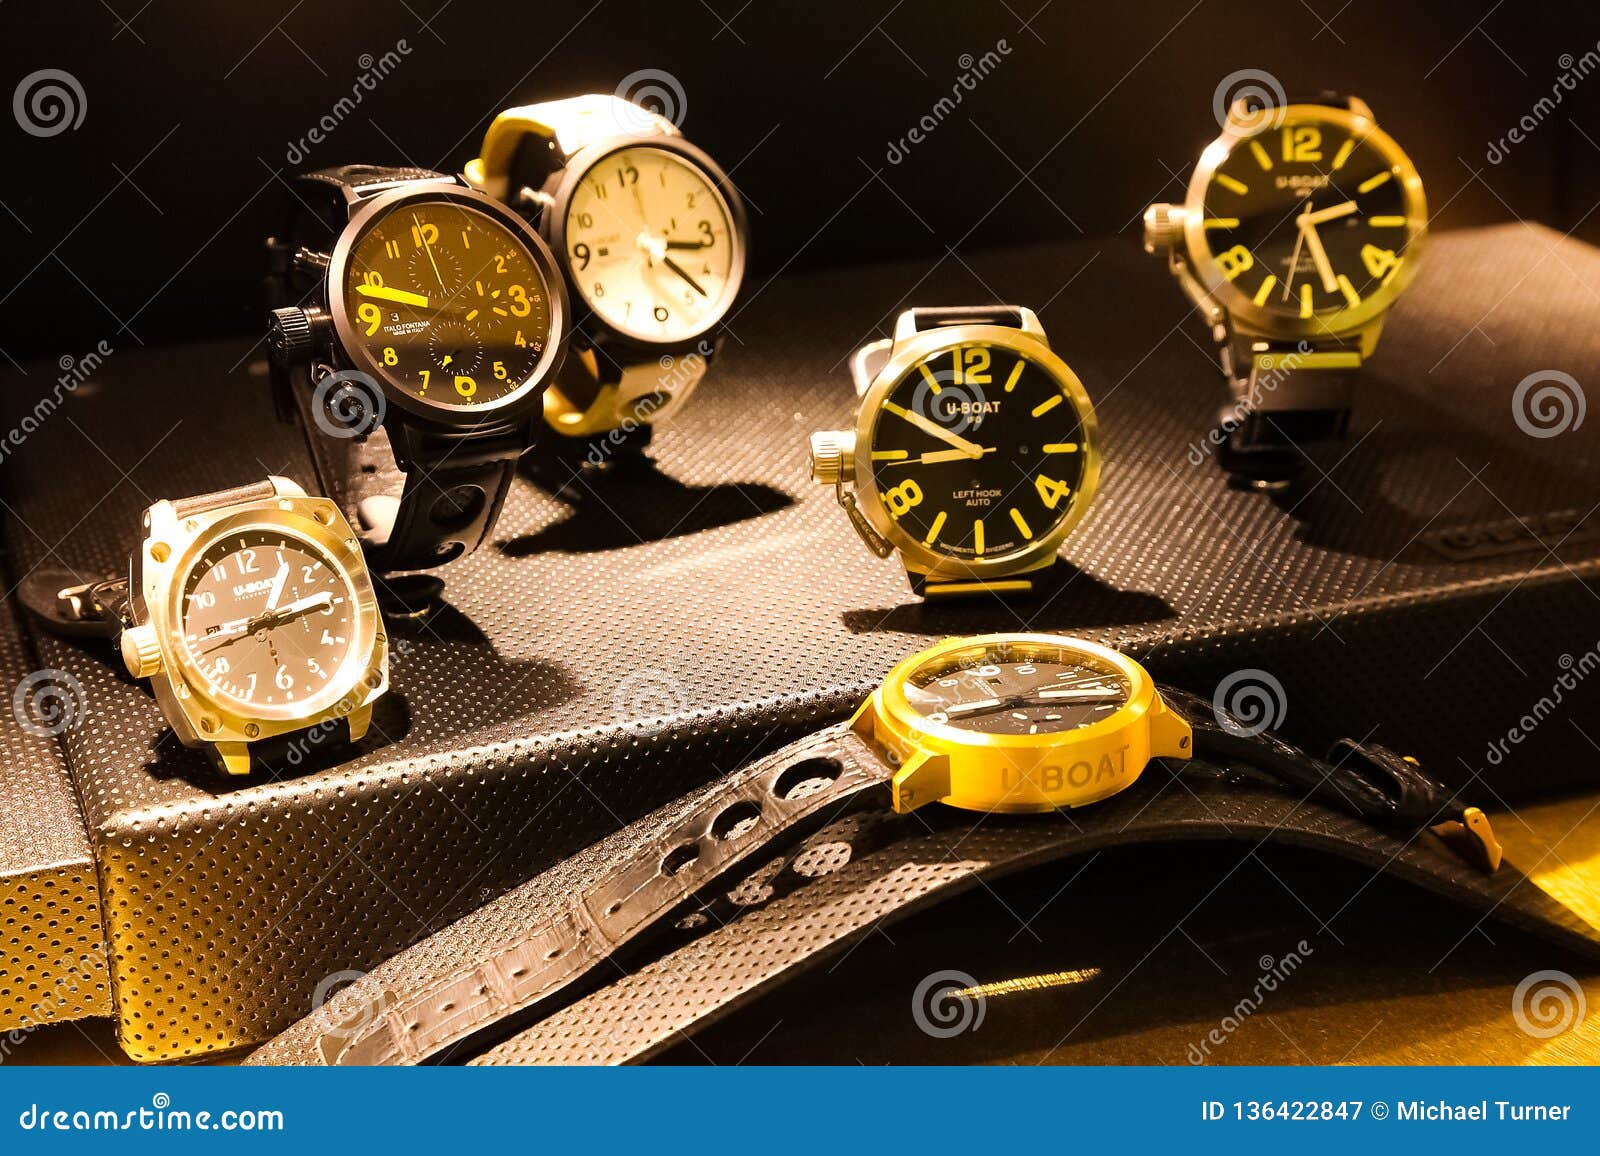 Expensive Wrist Watches on Display in Up-Market Retail Store Editorial ...